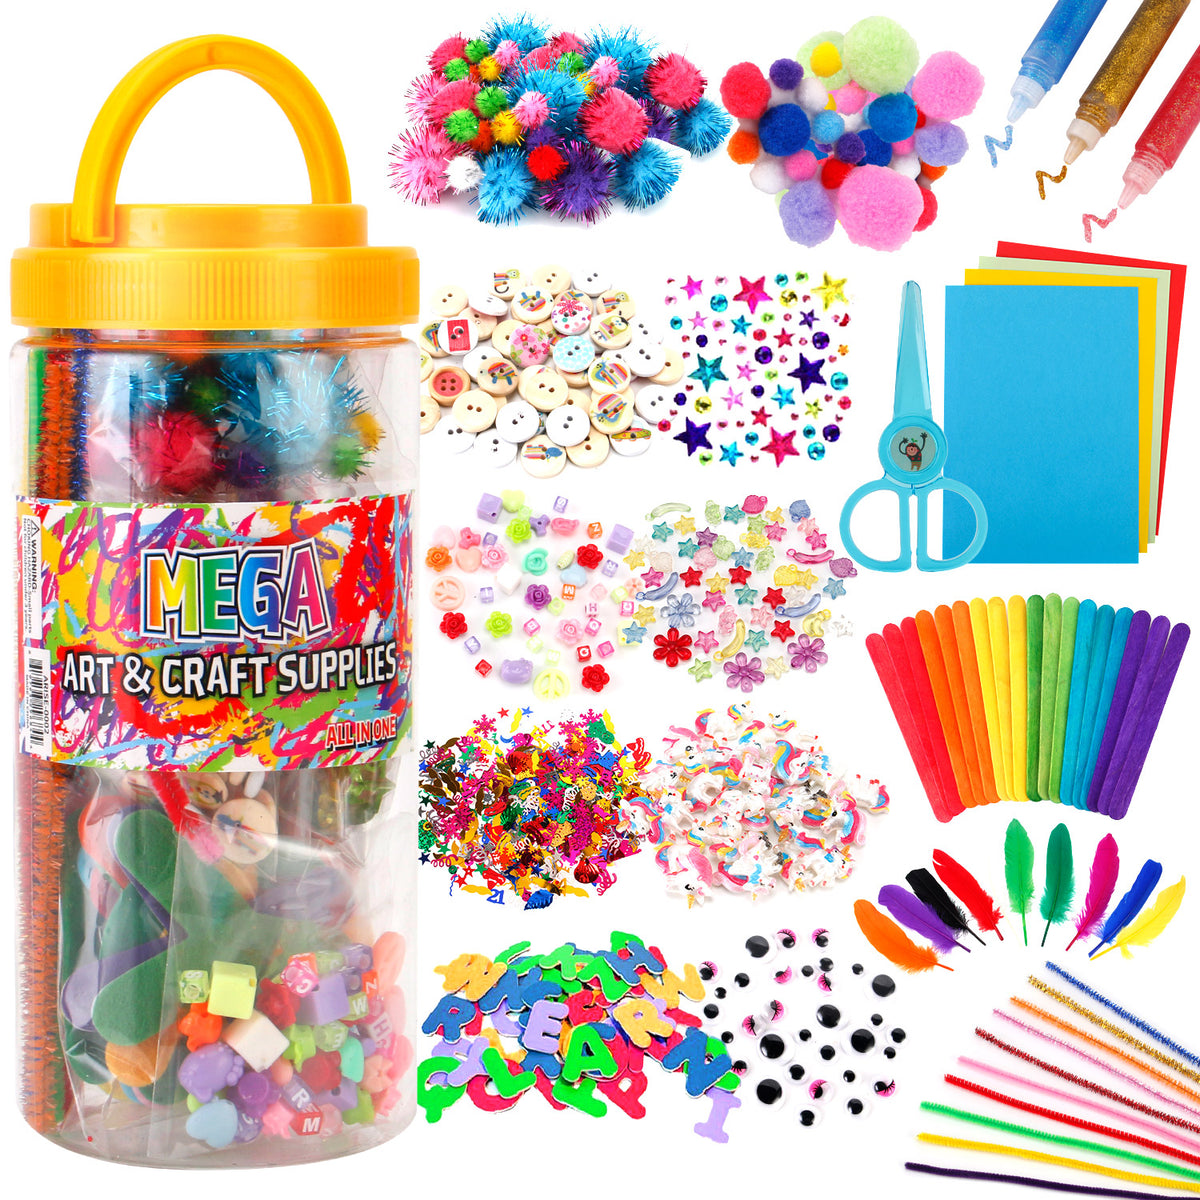  Mega Arts and Crafts Supplies Kit for Kids - Boys and